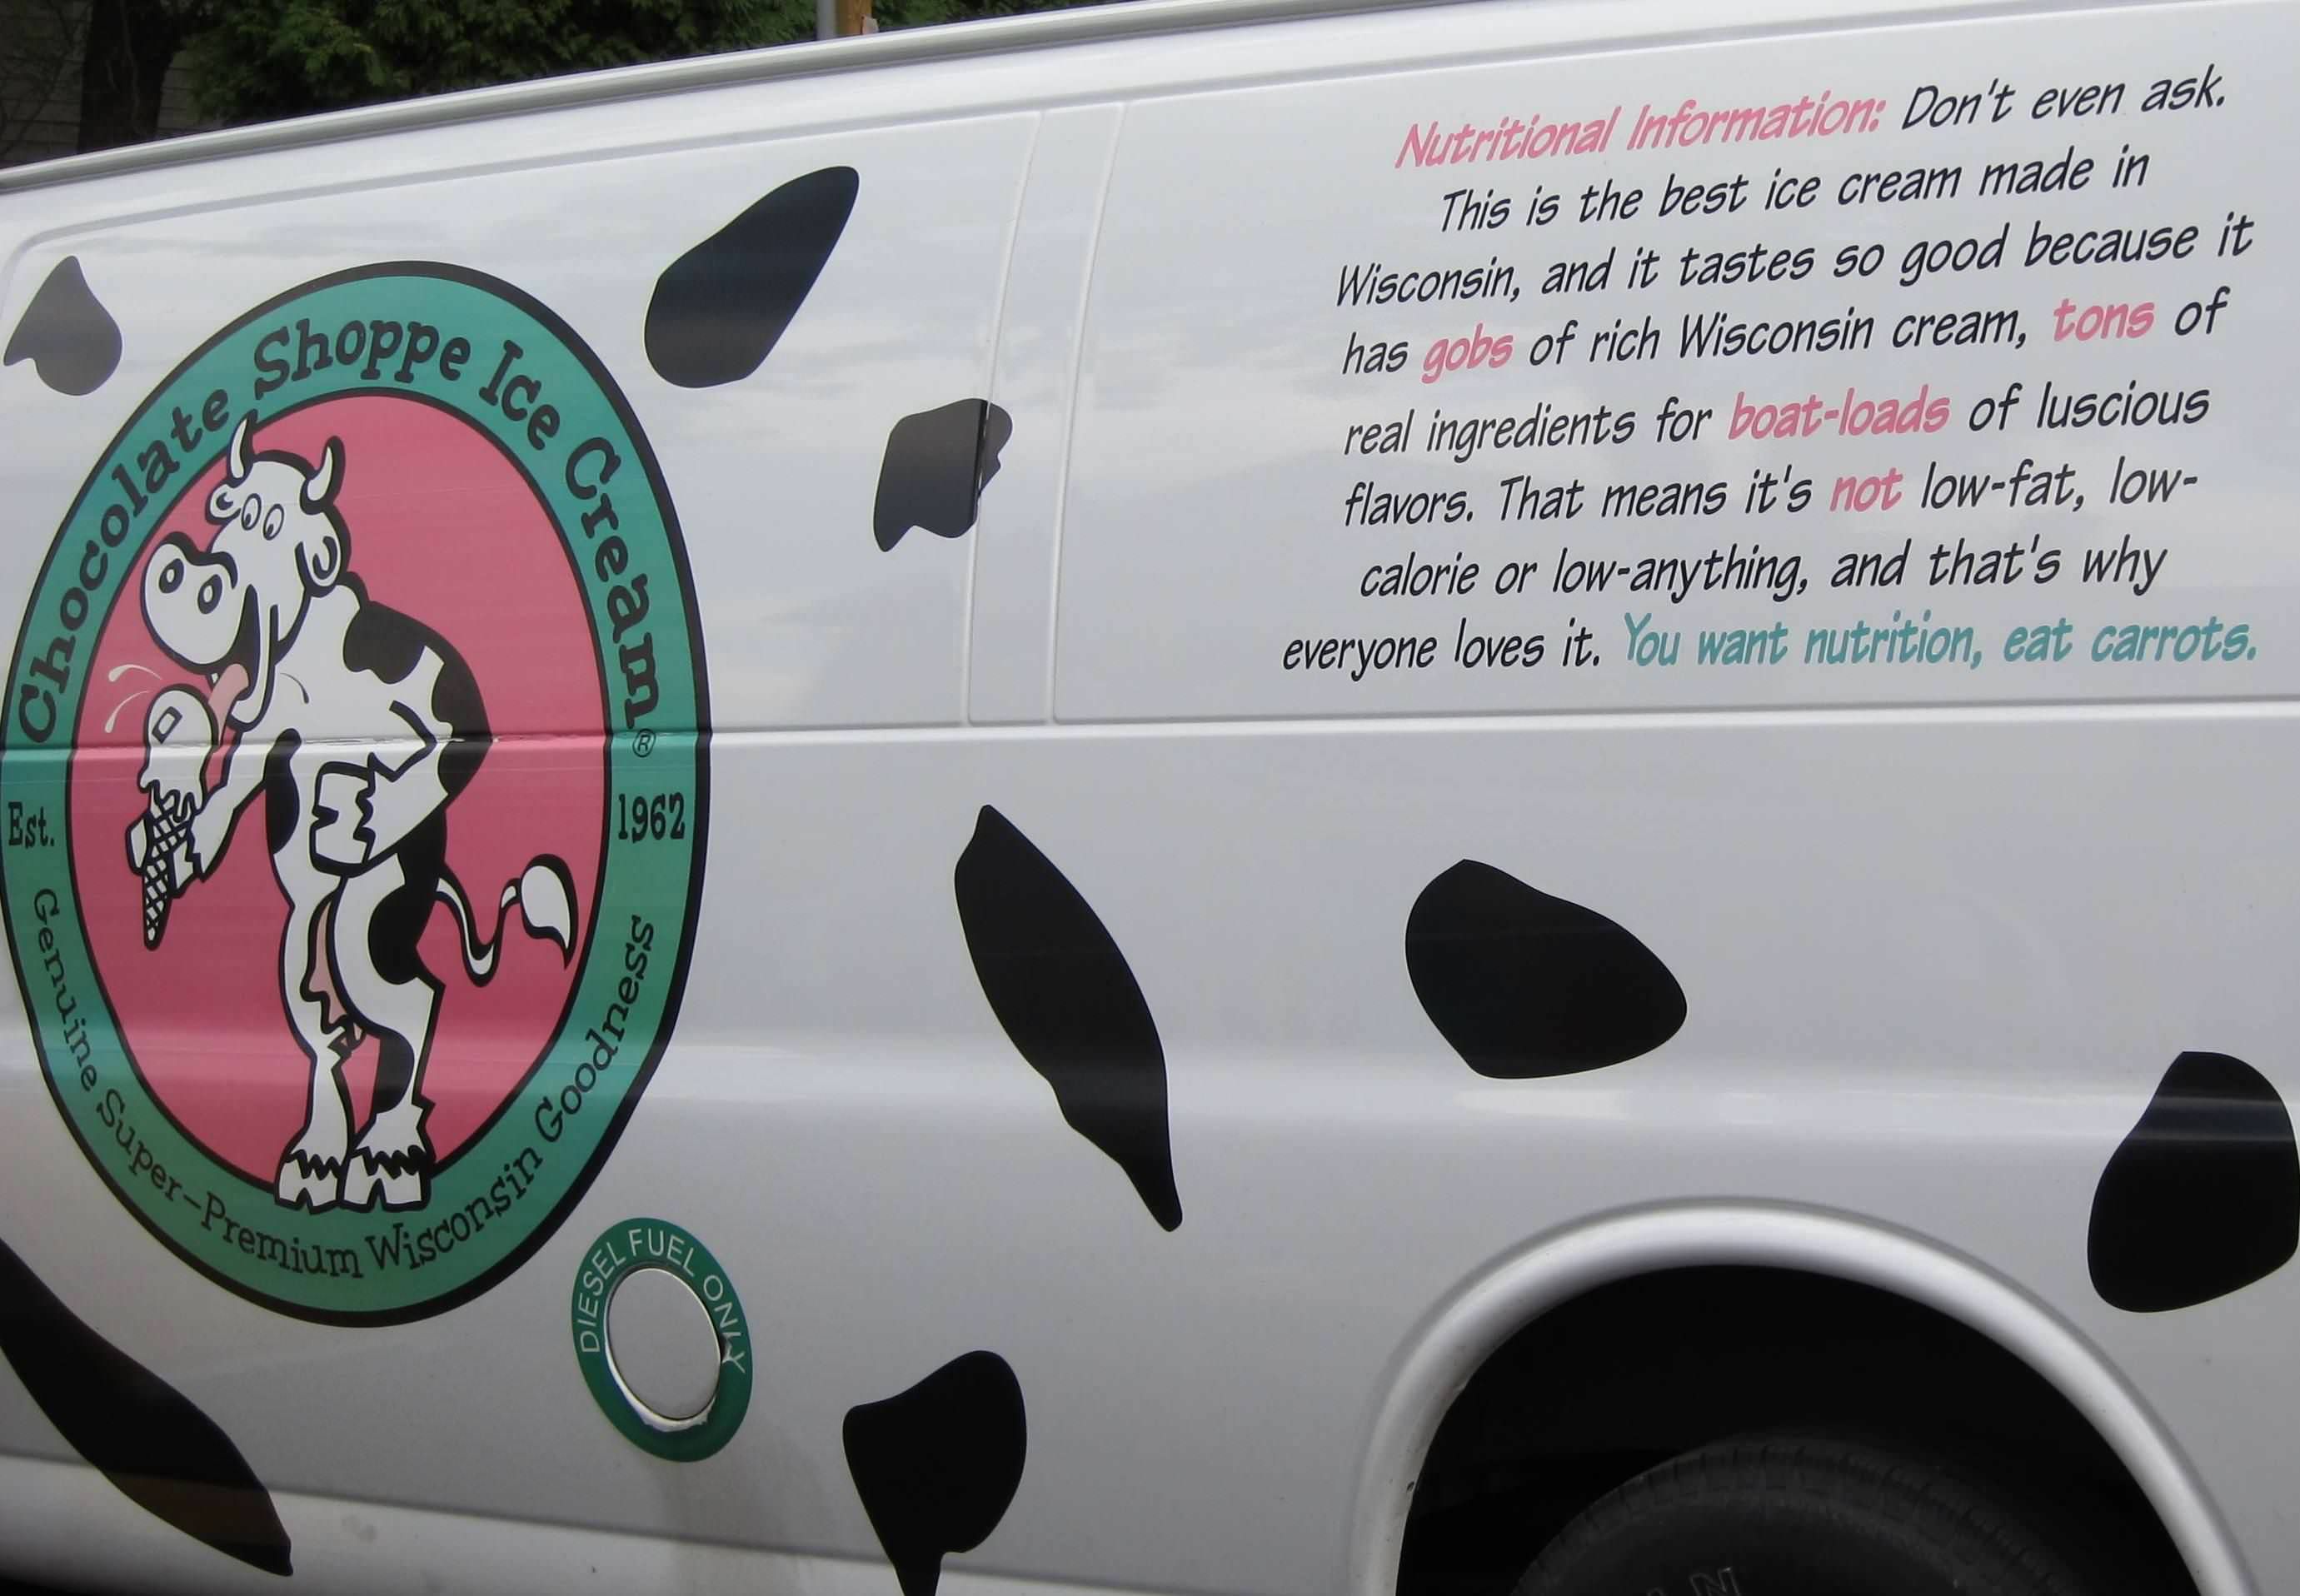 wisconsin ice cream truck - choppe Nutritional Information Don't even ask. This is the best ice cream made in Wisconsin, and it tastes so good because it has gobs of rich Wisconsin cream, tons of real ingredients for boatloads of luscious flavors. That me